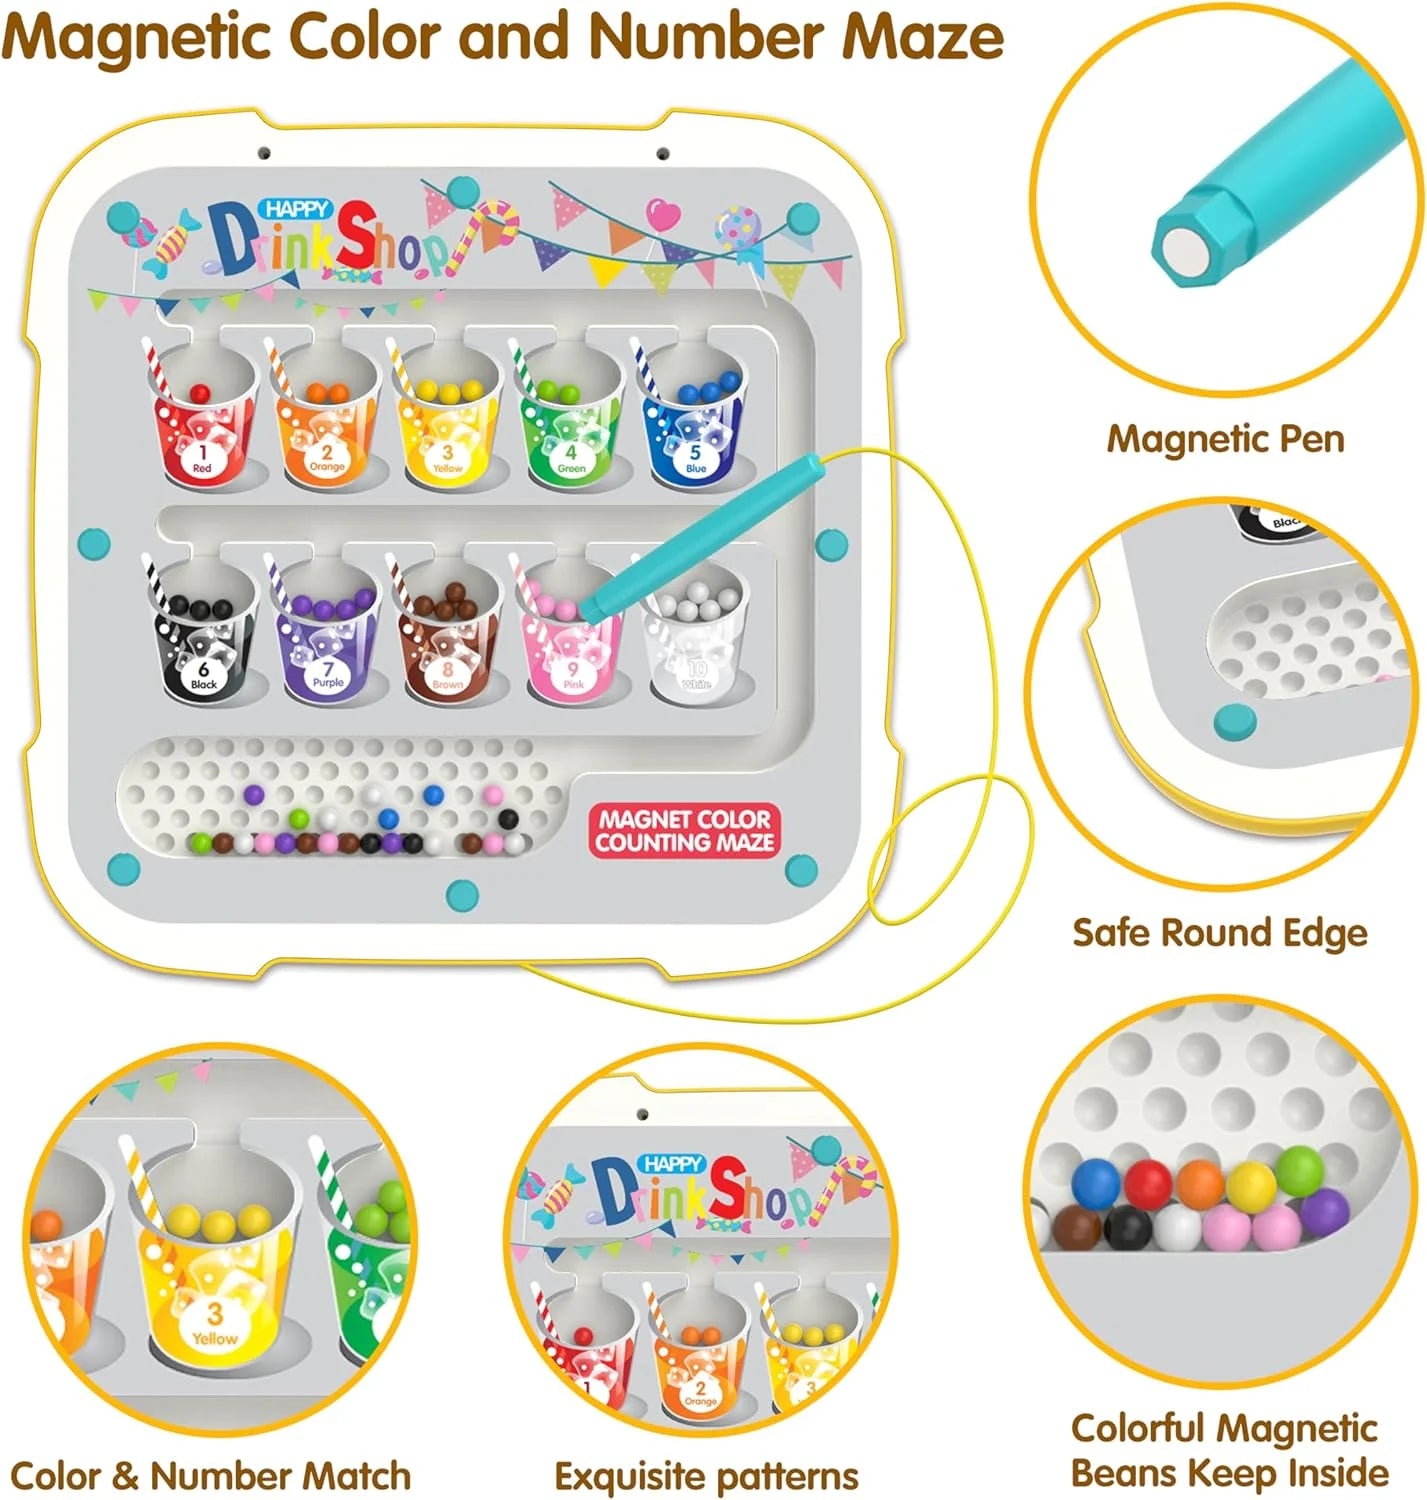 Premium Quality 2-in-1 Magnetic Dot Drawing Board & Magnetic Maze for Kids